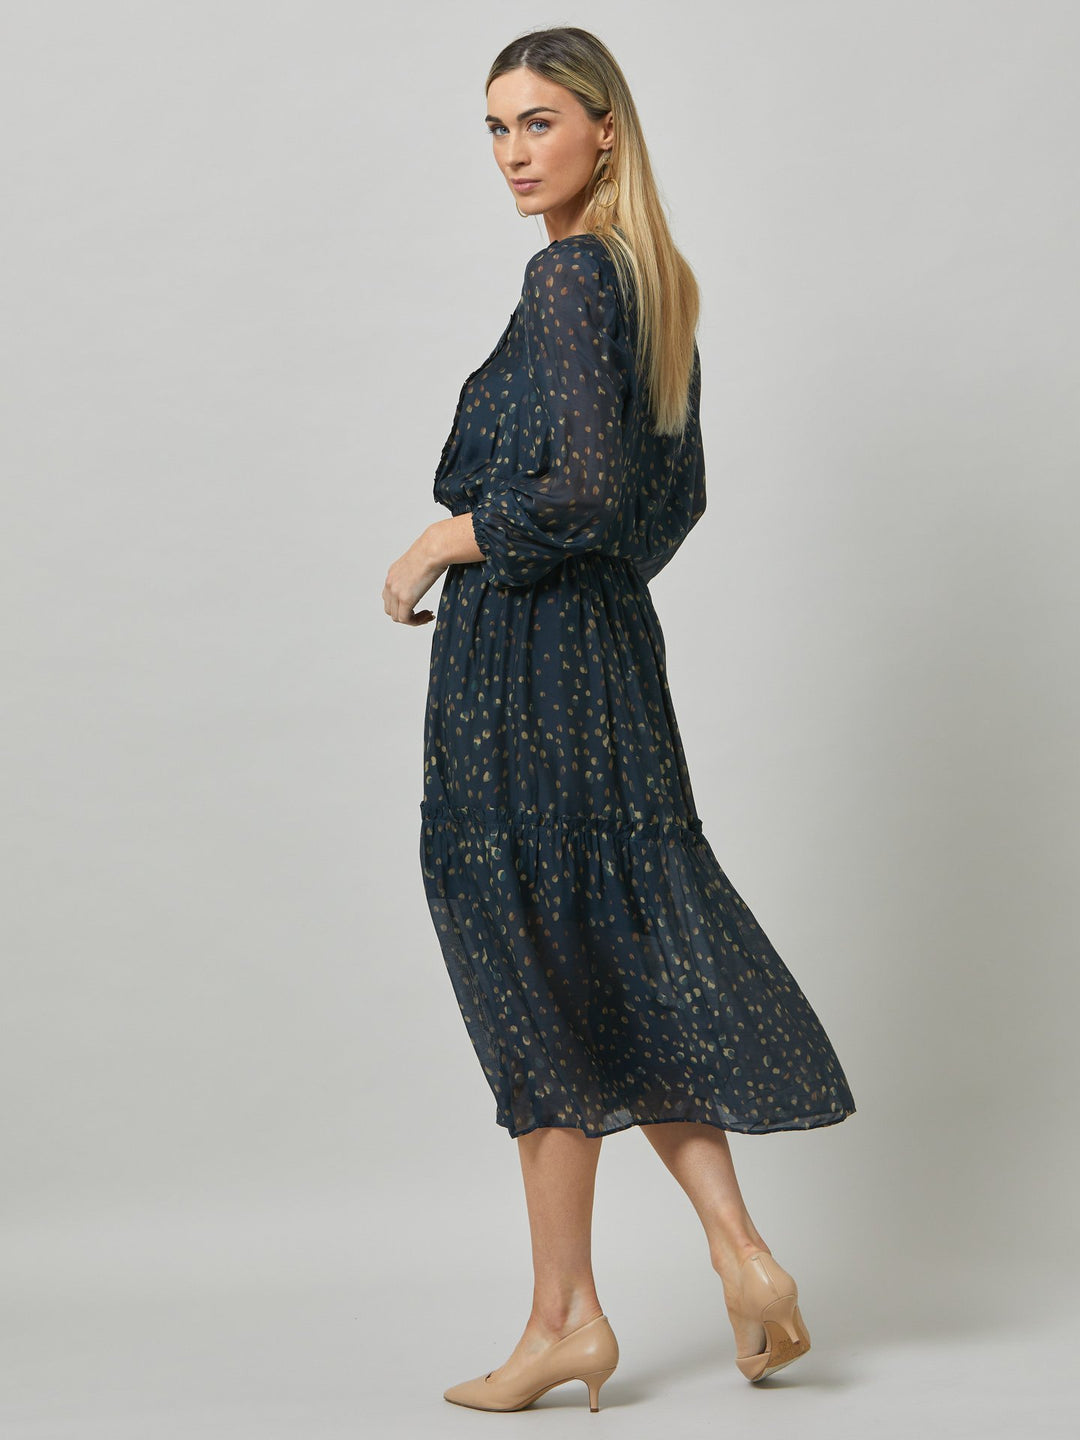 Bailey, elevate your game in this silk blend abstract print teal dress. Light and floaty with voluminous three-quarter-length sleeves. Feminine frills run from the shoulder to the waistline which falls into a bohemian tiered skirt.